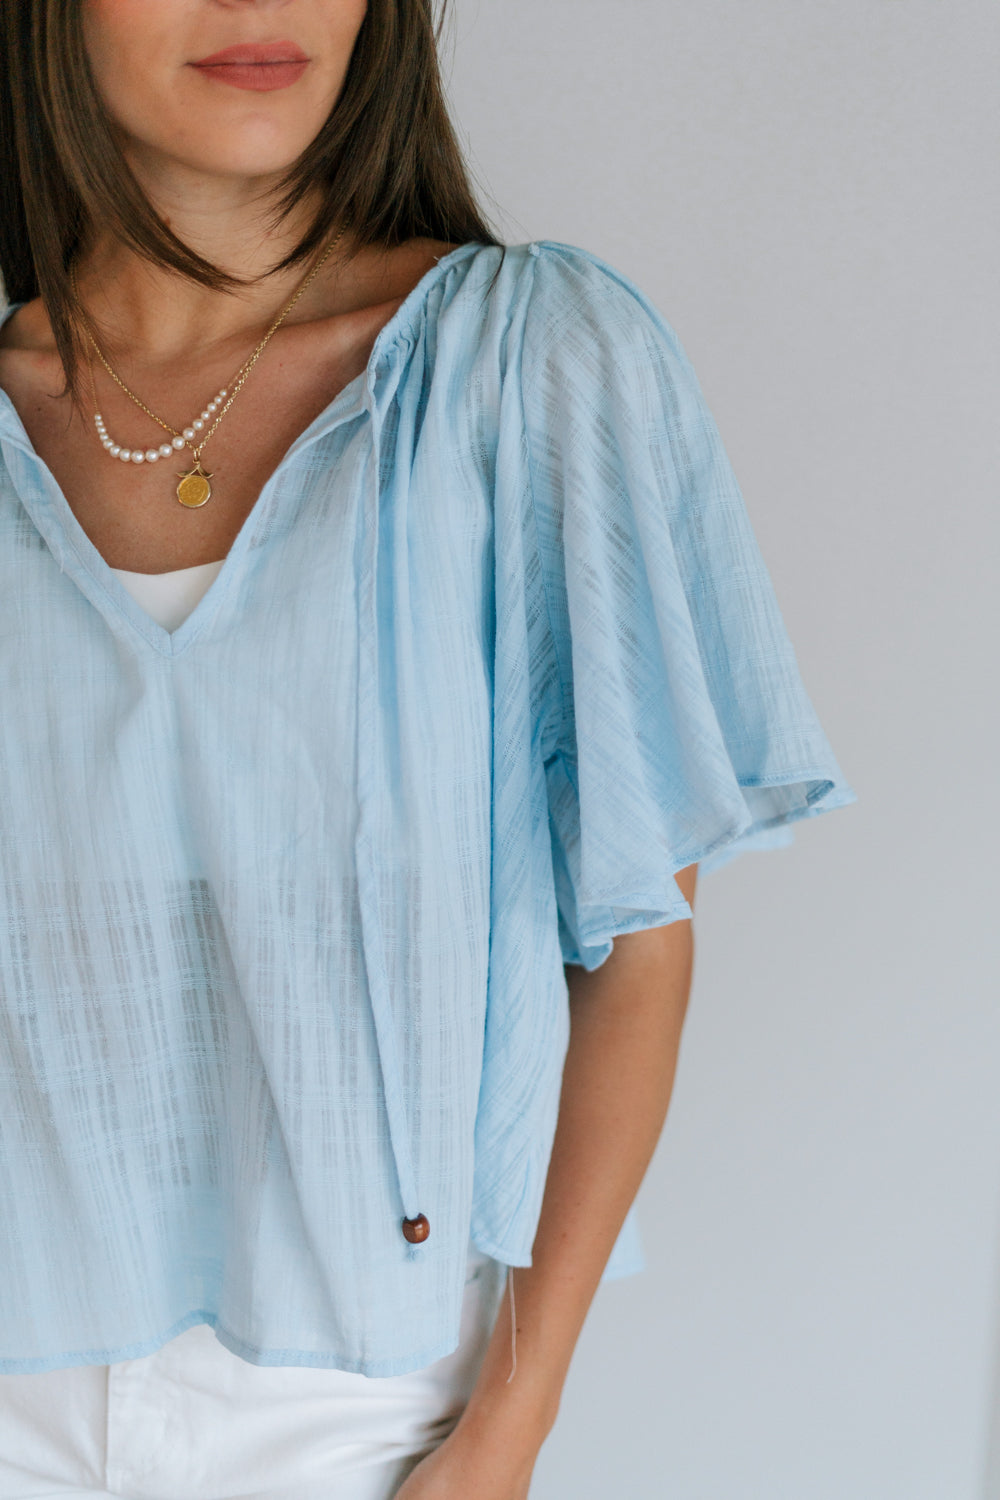 Close up view of female model wearing the Danna Light Blue Short Sleeve Top which features Light Blue Cotton Fabric, Round Neckline with Tie Closure, Wooden Beads Detail and Short Sleeves